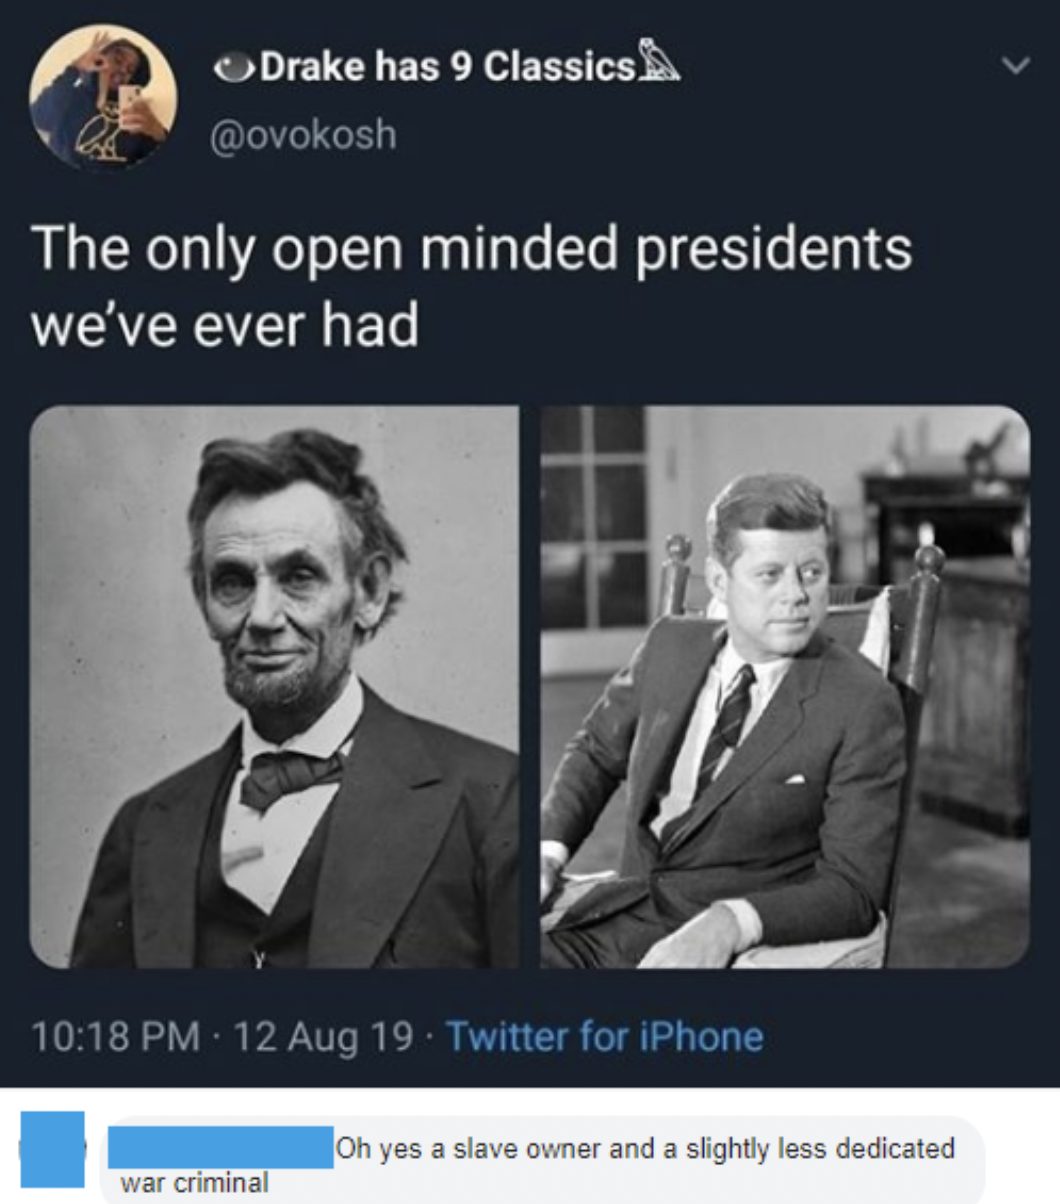 Didn't get the joke - The only open minded presidents we've ever had